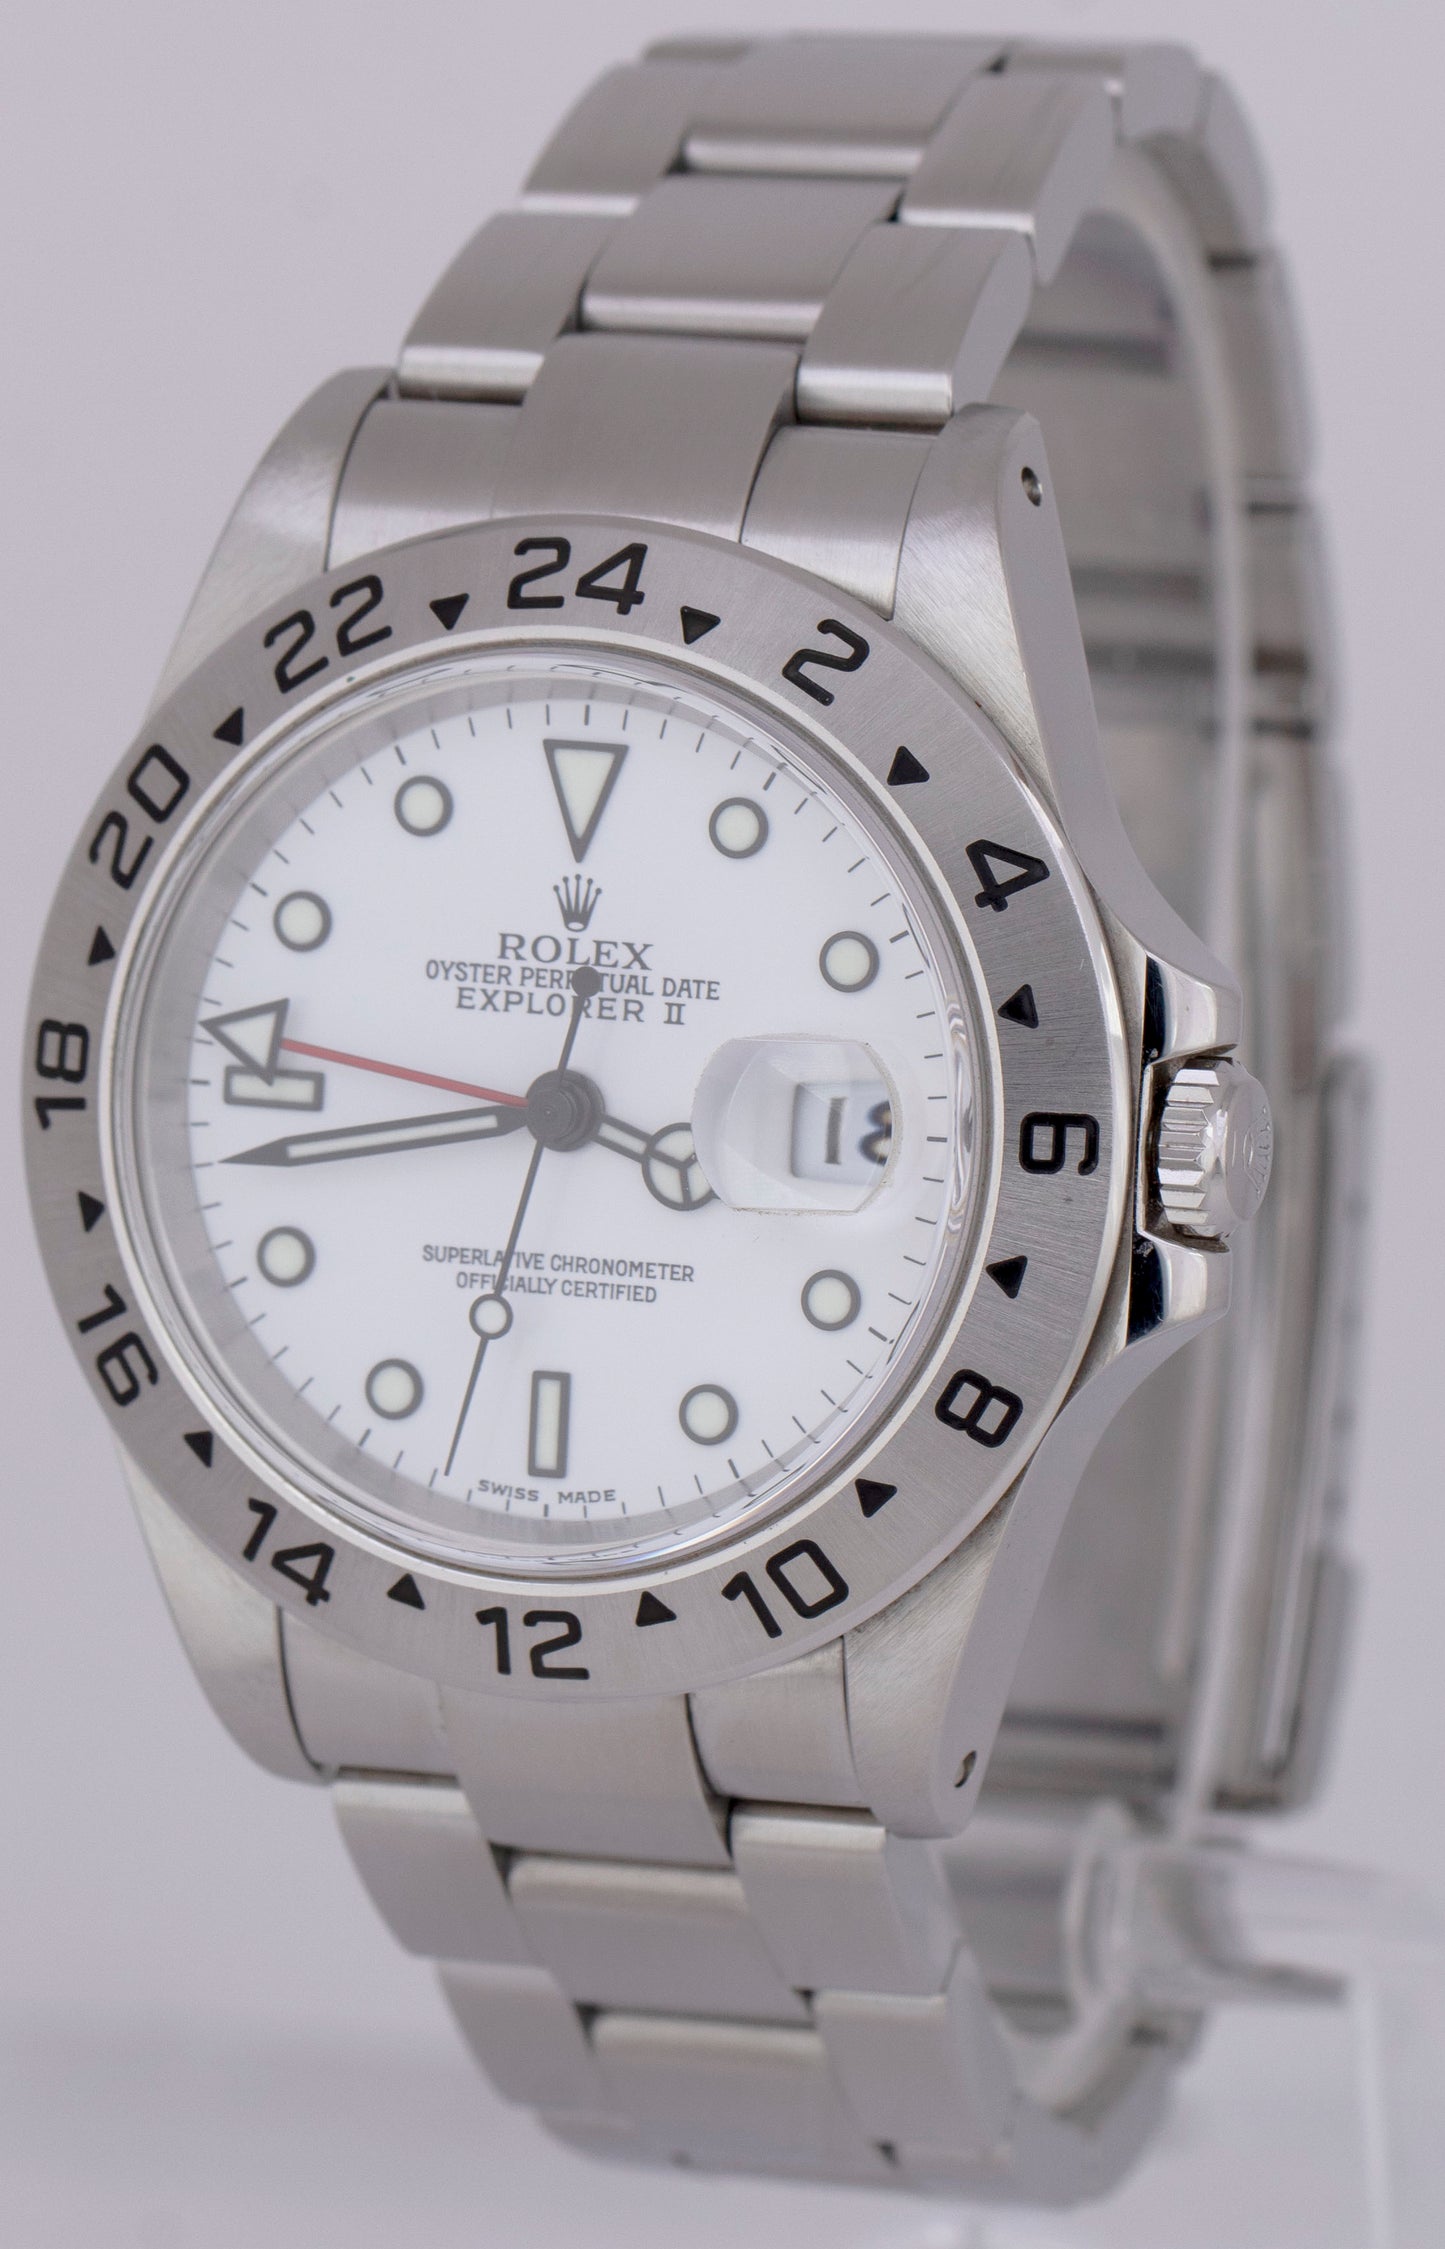 UNPOLISHED Rolex Explorer II Polar White Stainless SEL 40mm Date Watch GMT 16570